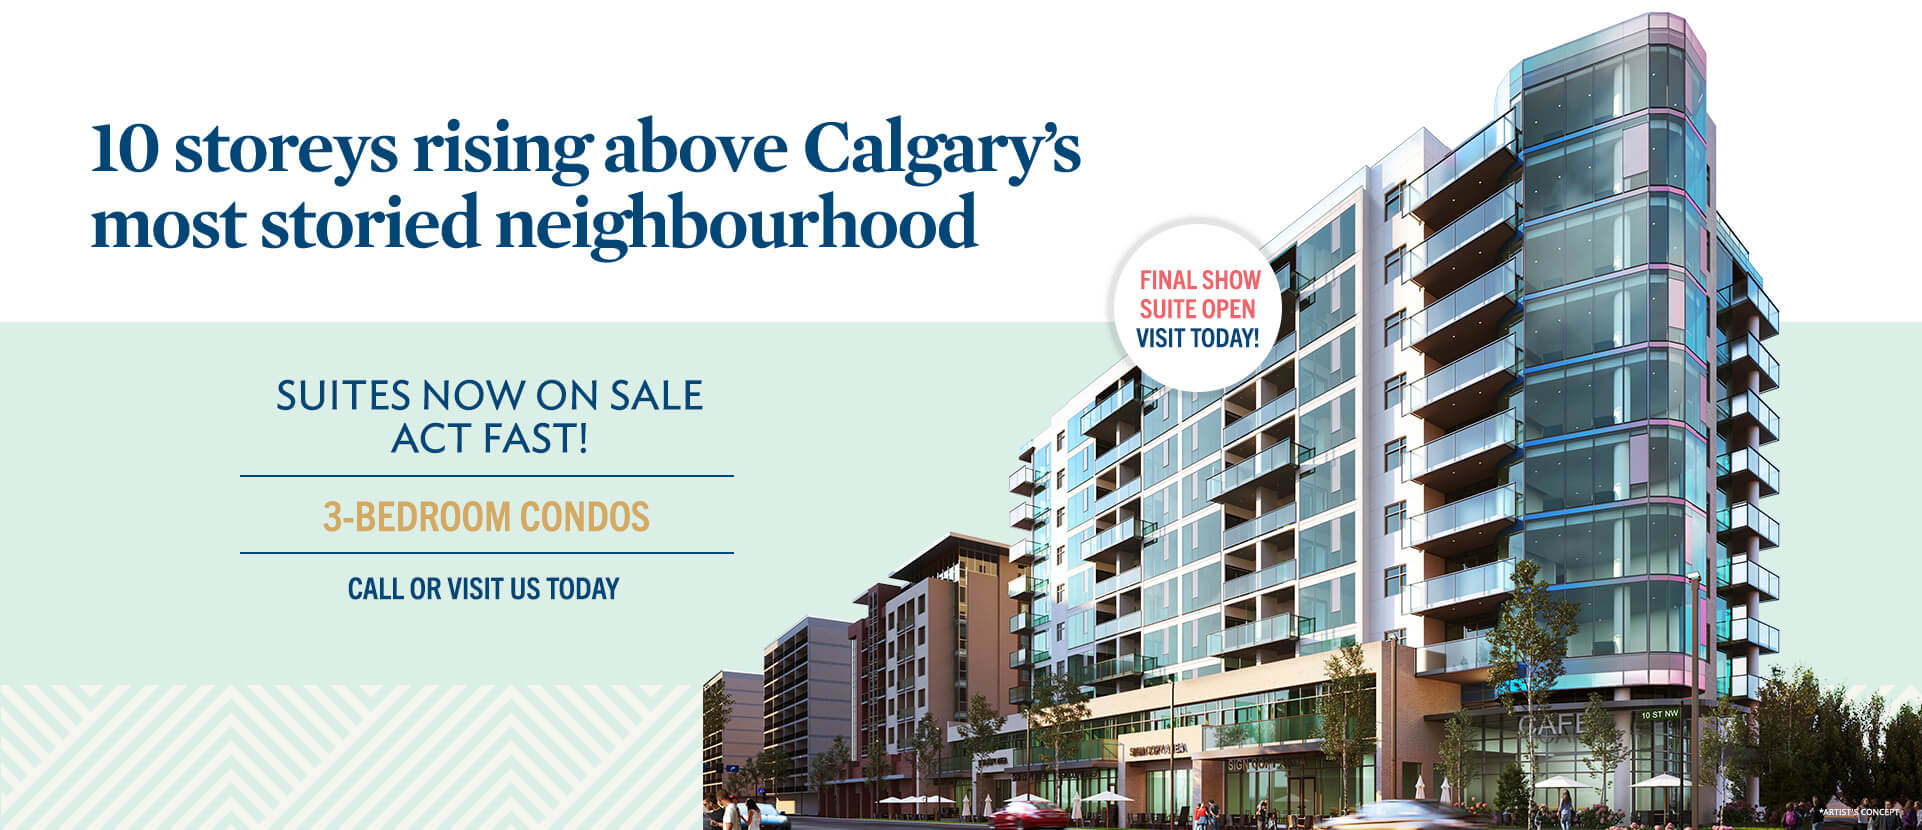 Text: 10 storeys rising above Calgary's most storied neighbourhood. Suites now on sale. Act Fast! Graphic: Rendering of the Theodore in Kensington